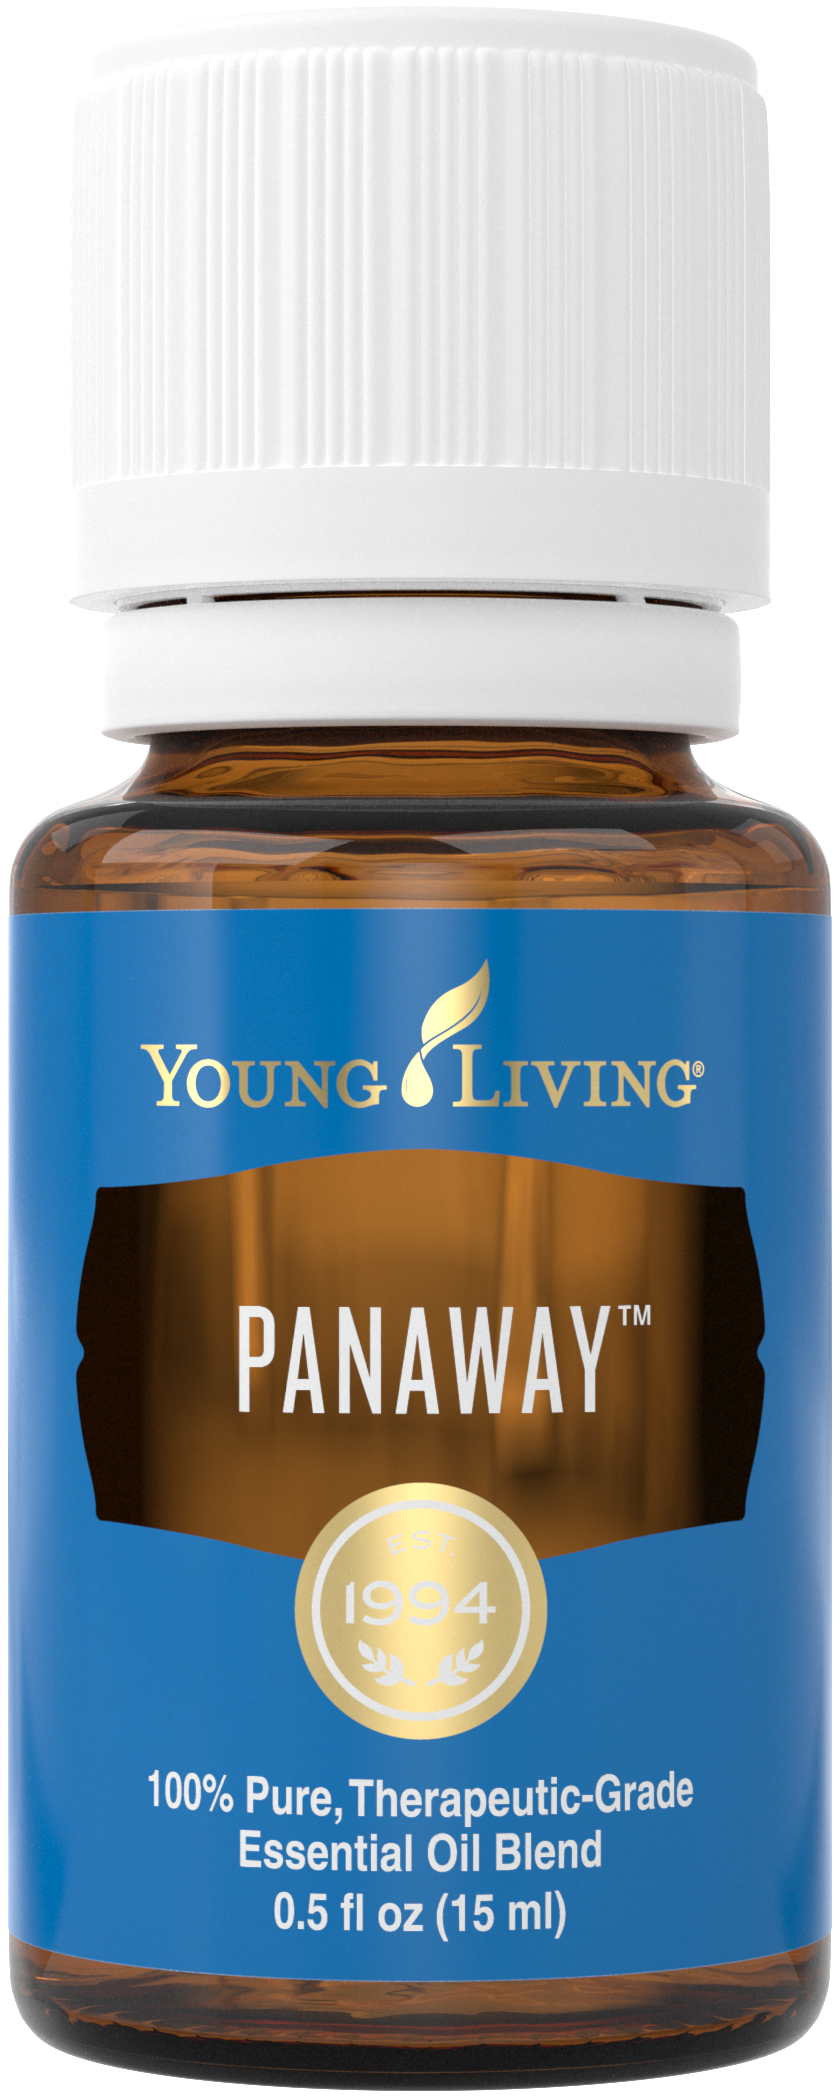 PanAway essential oil benefits and uses